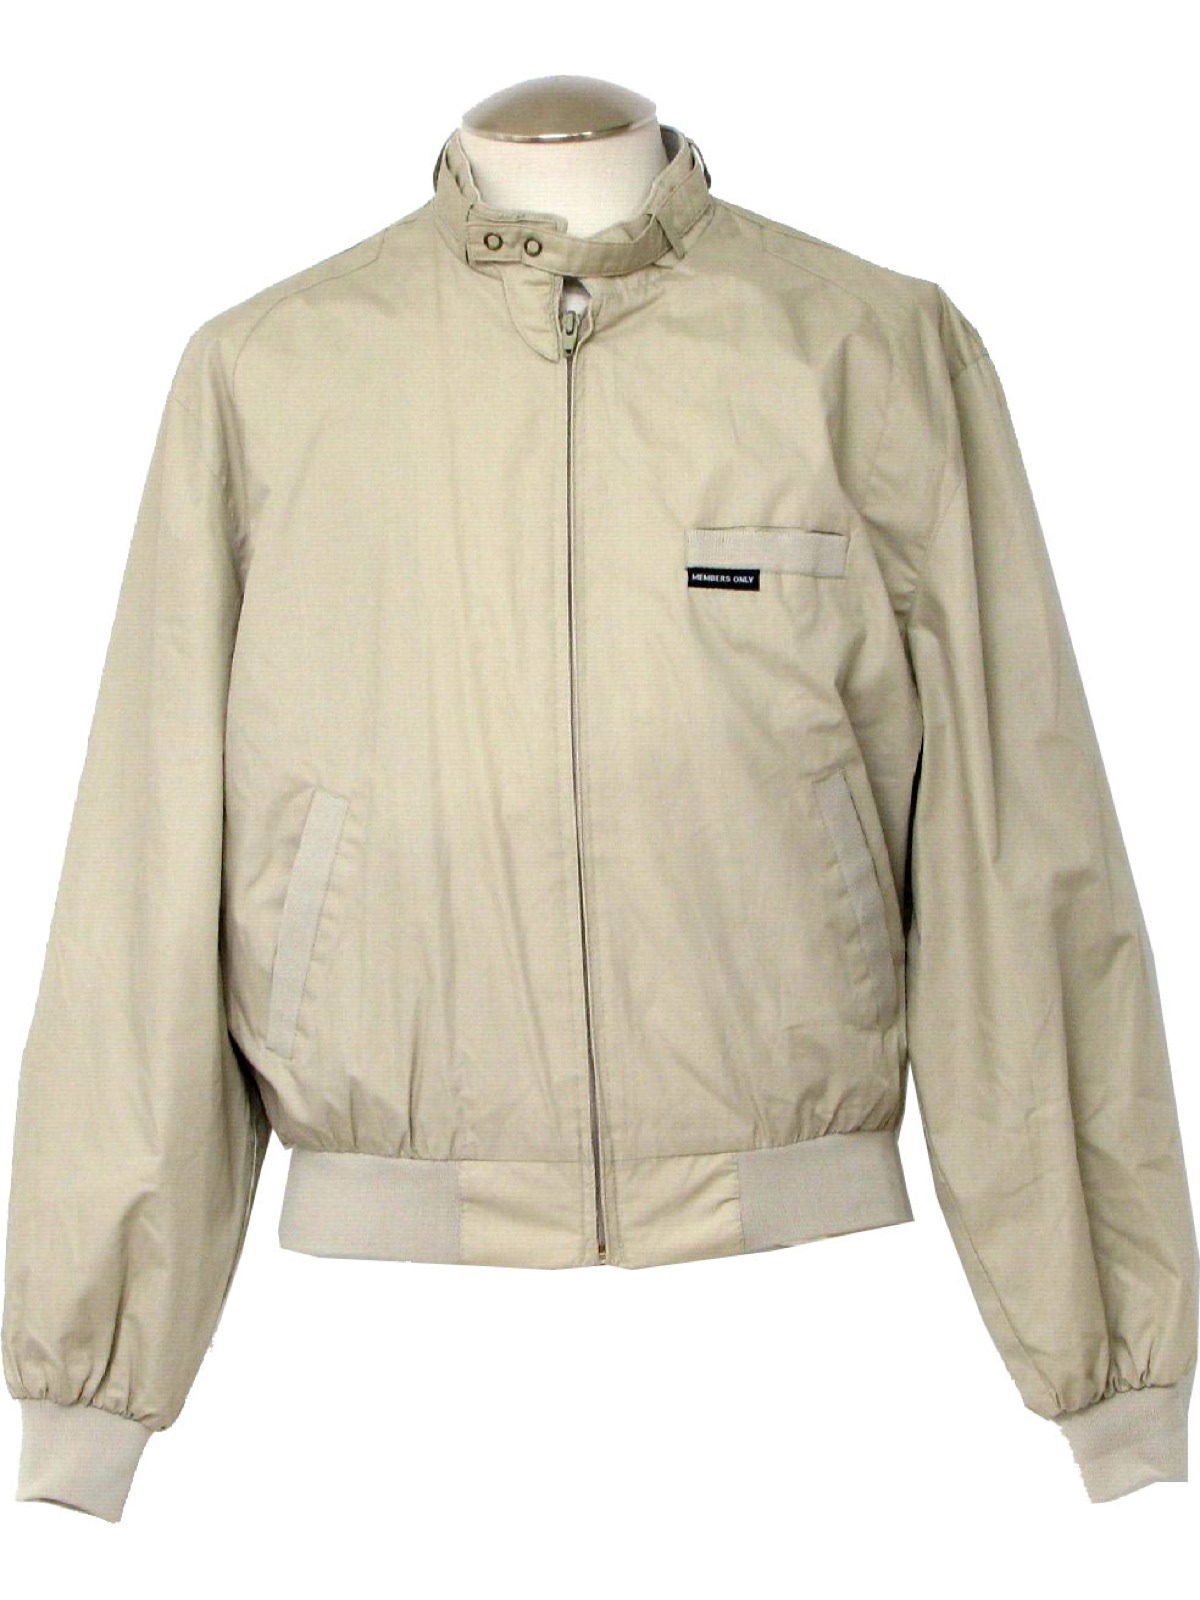 1980's Vintage Members Only Jacket: 80s -Members Only- Mens tan cotton ...